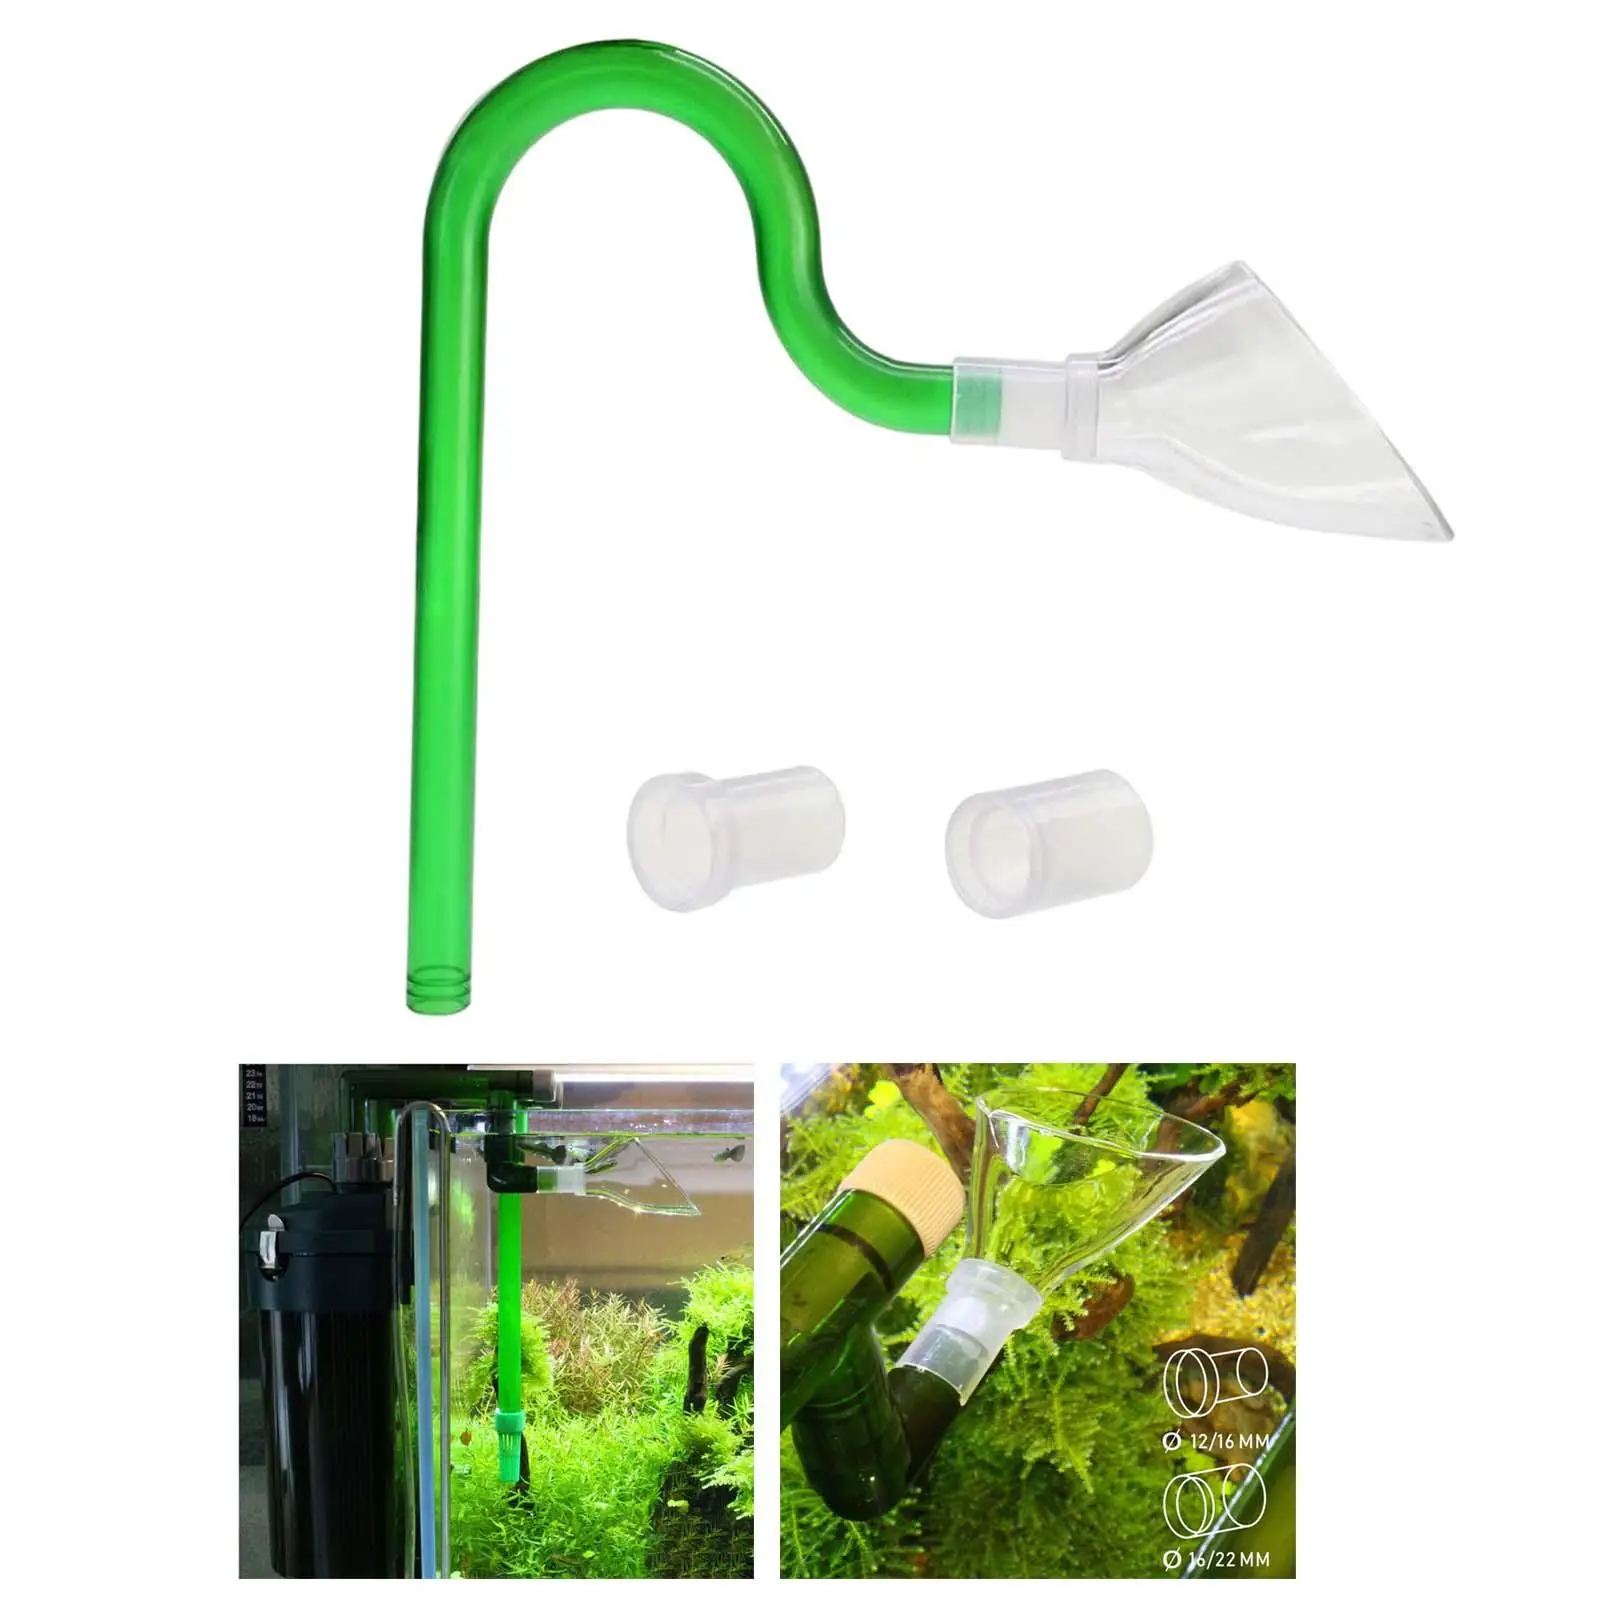 Aquarium Lily Pipe Outflow Supplies Filter Adjustable for Planted Tank Freshwater Surface Aquatic Filter System